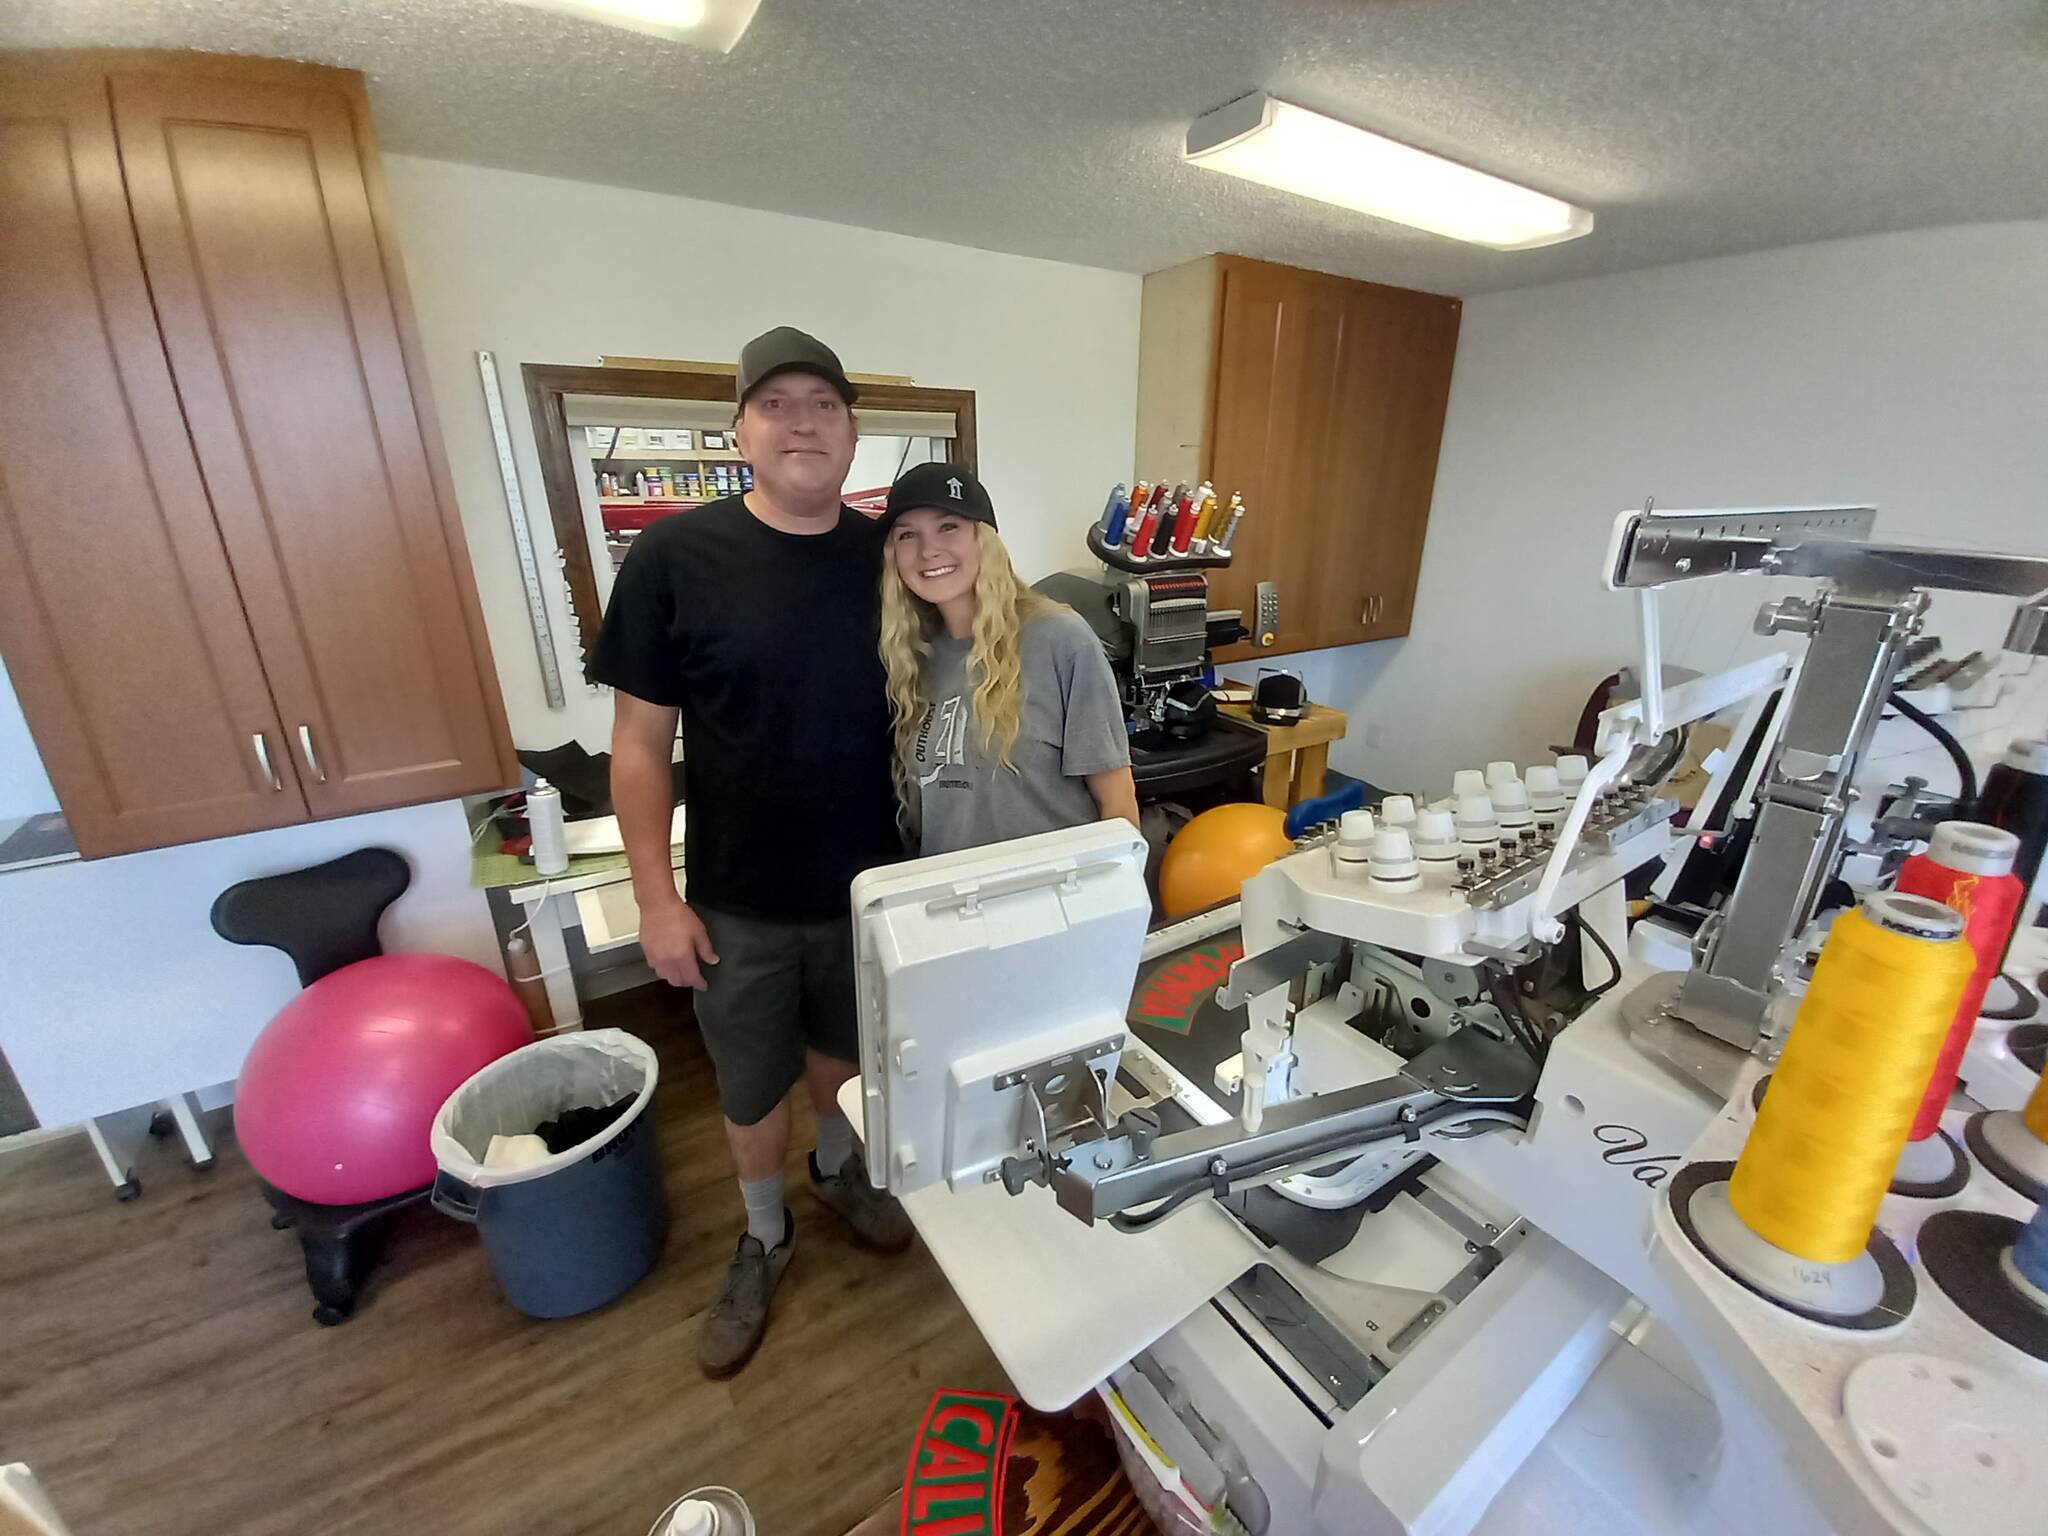 Robert Whale / Auburn Reporter
Jon Williams and his daughter, Courtney, run the highly successful family business, The Outhouse, the go-to-place for silk screening and embroidery in the area.